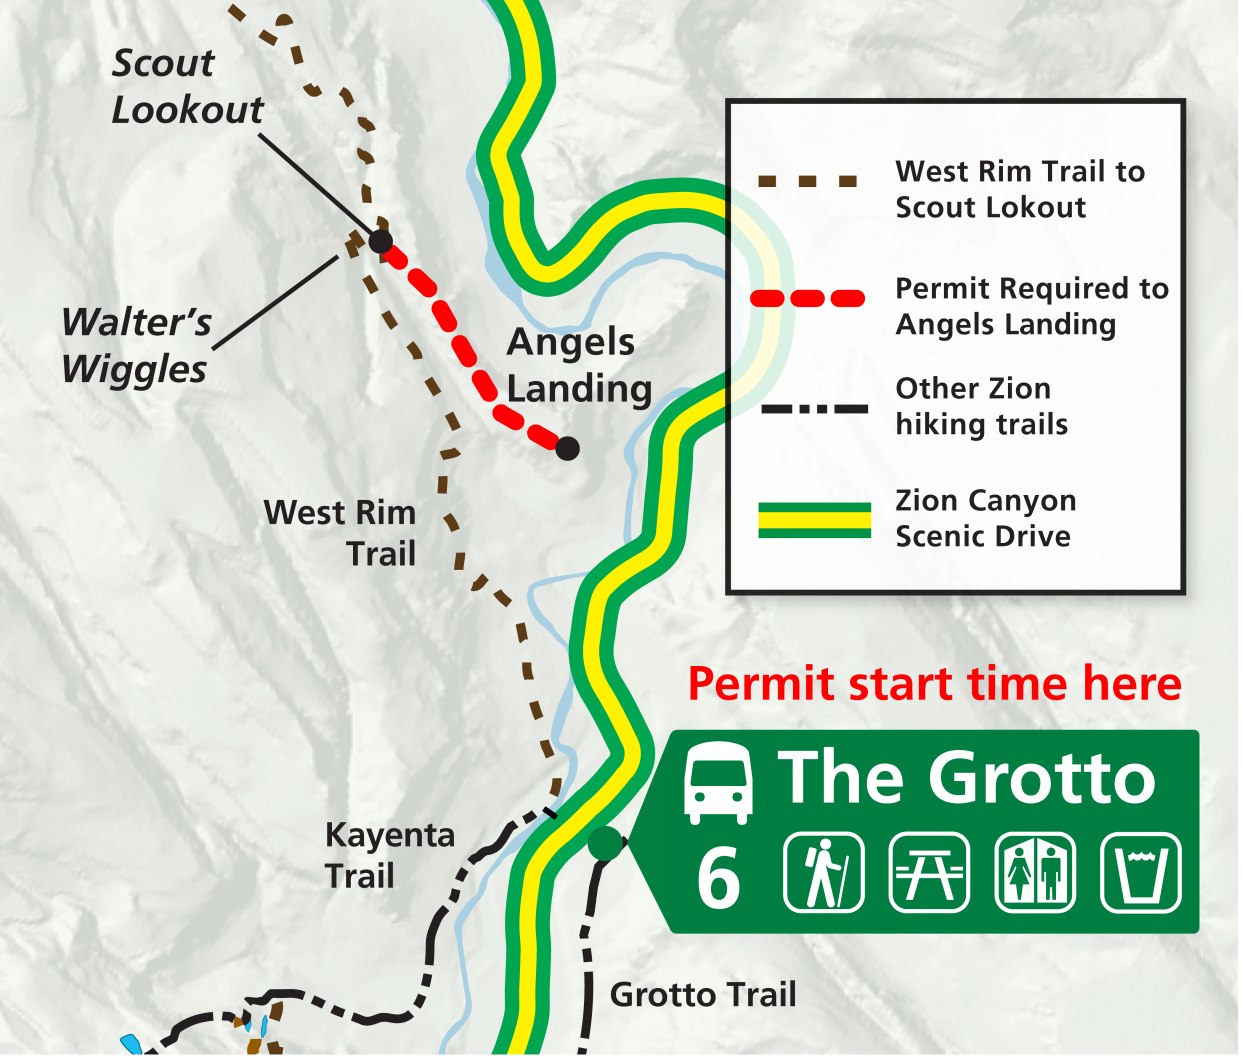 This map shows how where visitors must exit from a shuttle bus to access the Angels Landing Trail, a short climb at the end of a longer and more moderate trail. Zion Canyon Scenic drive is currently closed to vehicle traffic except for park shuttle buses.